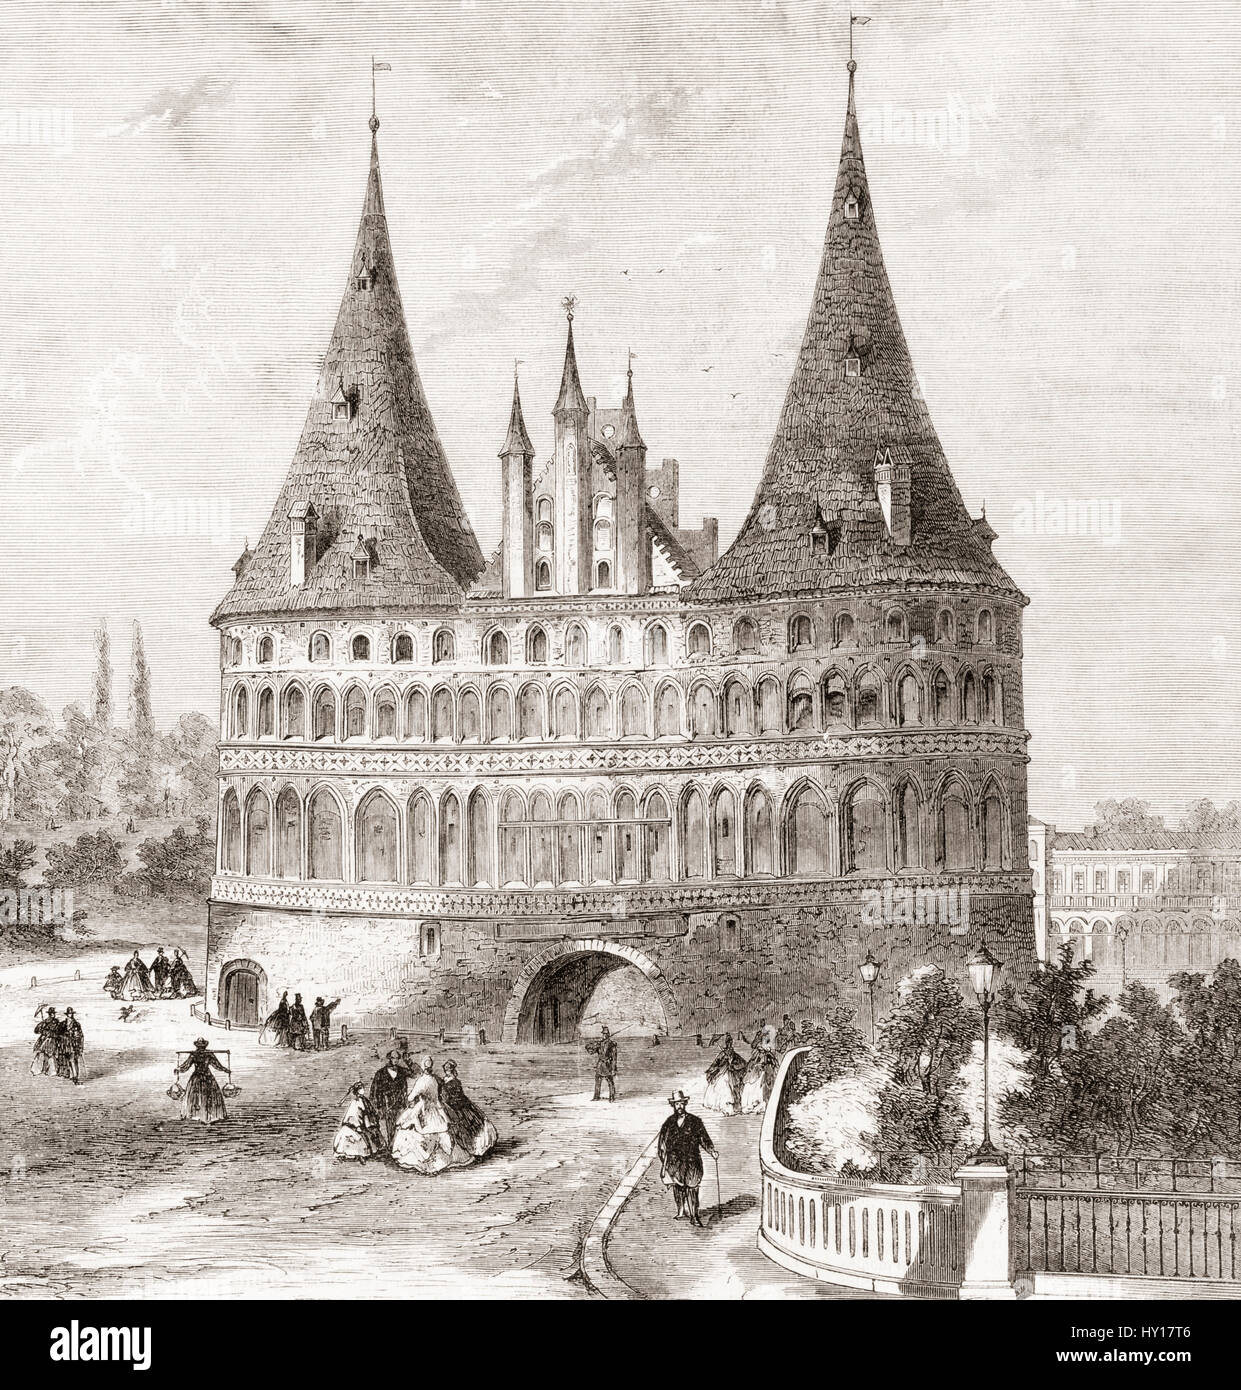 The Holsten Gate aka Holstein Tor or Holstentor, Lübeck, Schleswig-Holstein, northern Germany in the 19th century.  From L'Univers Illustre published 1867. Stock Photo